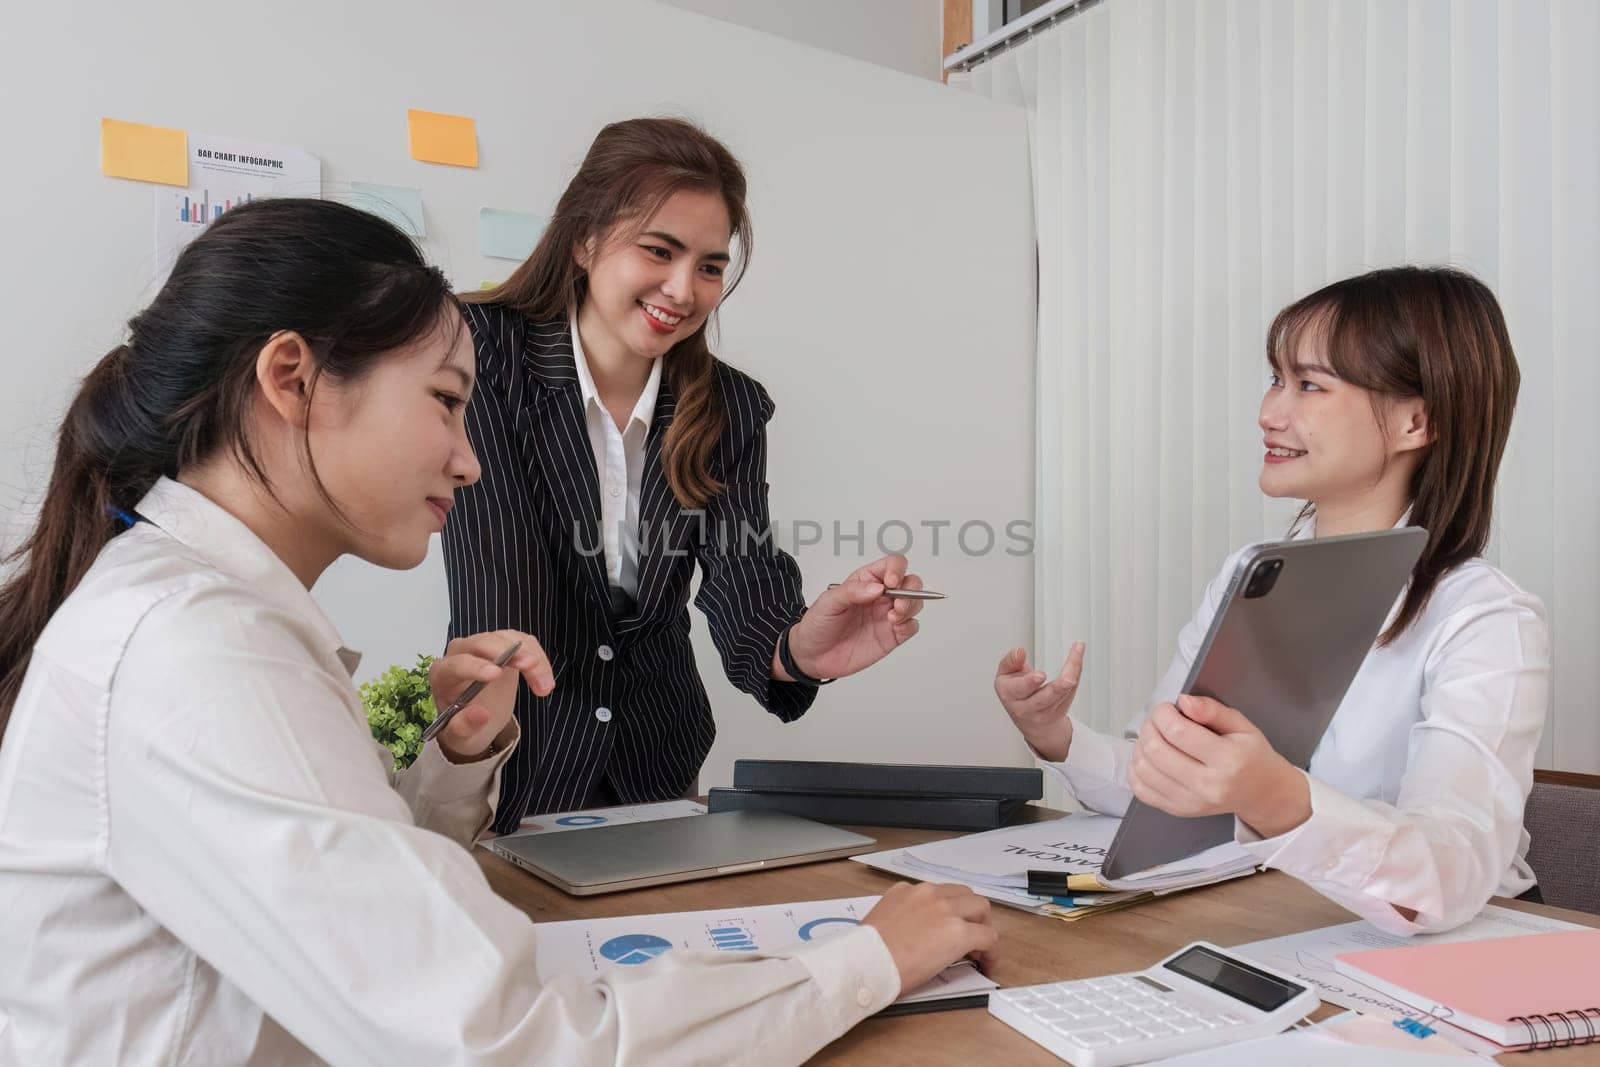 Business People Meeting using laptop computer,calculator,notebook,stock market chart paper for analysis Plans to improve quality next month. Conference Discussion Corporate Concept..